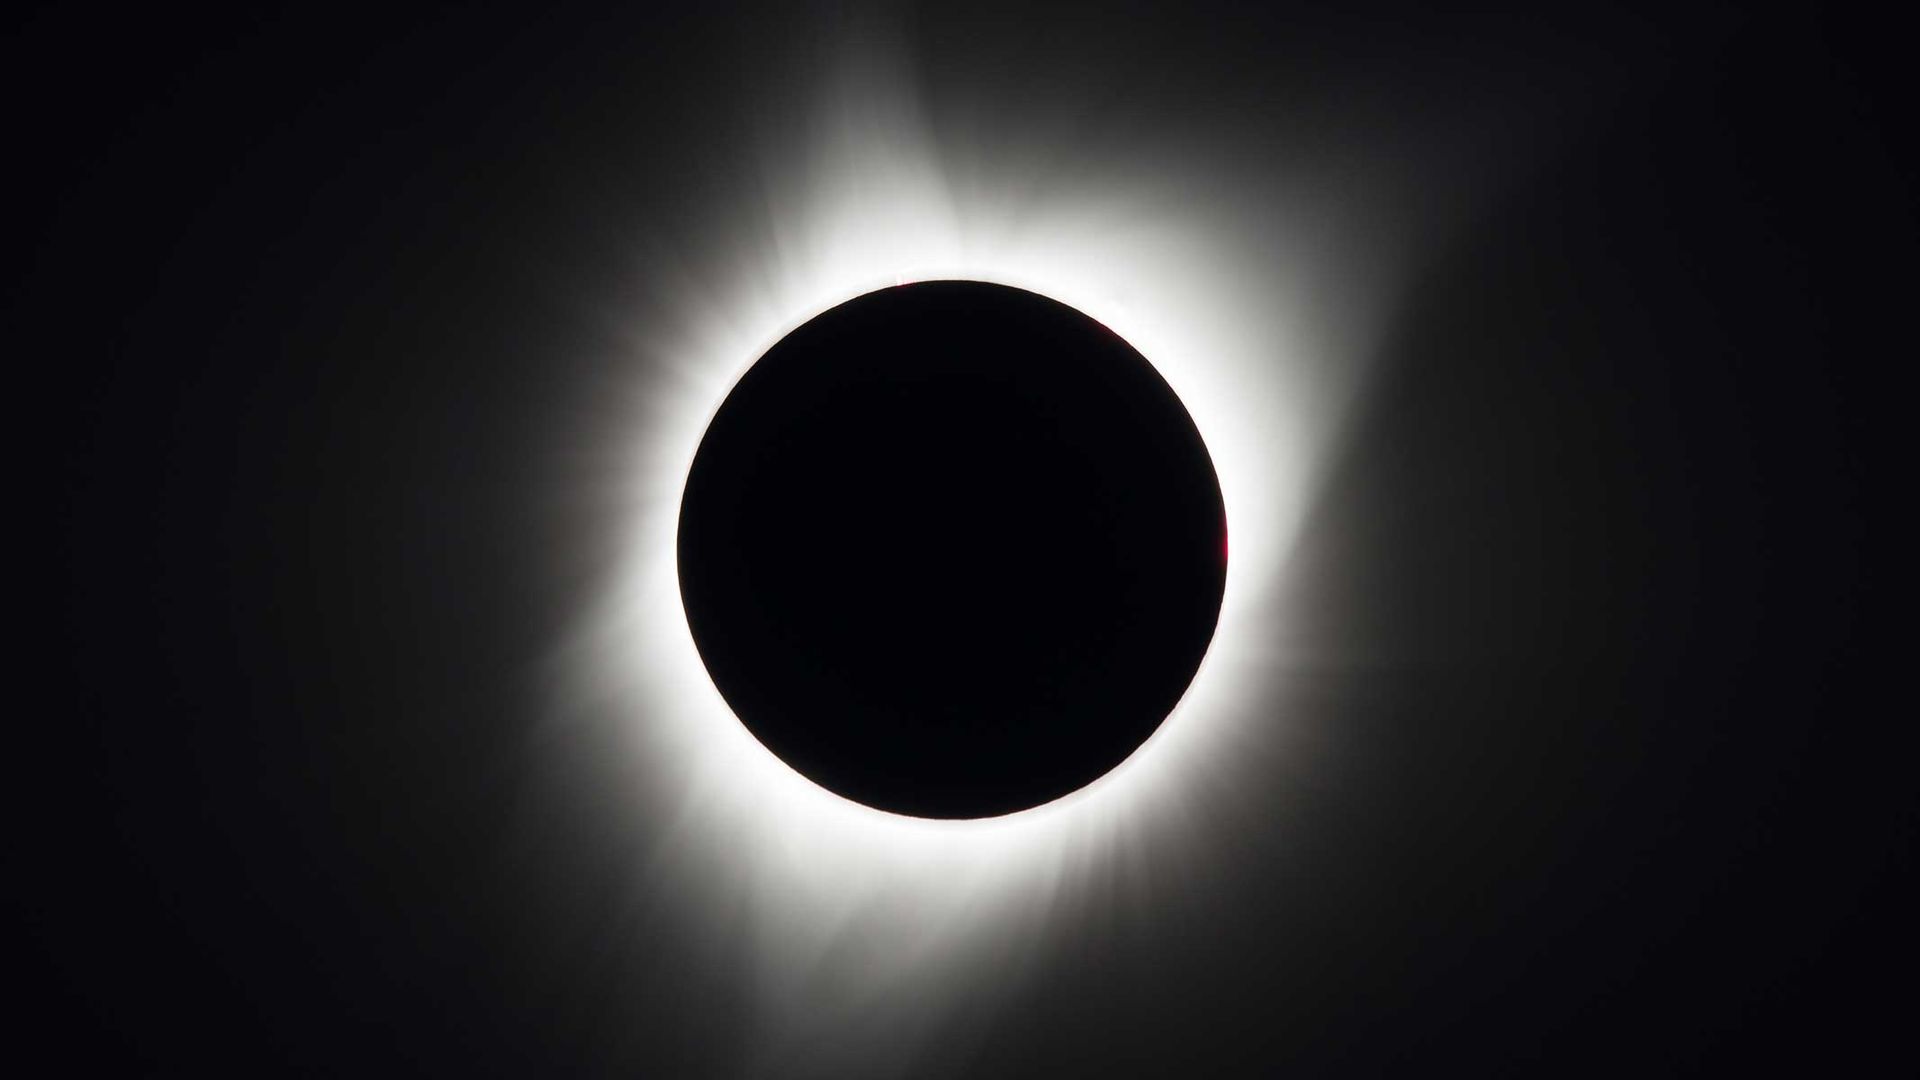 We're two years away from the Great North American Solar Eclipse of